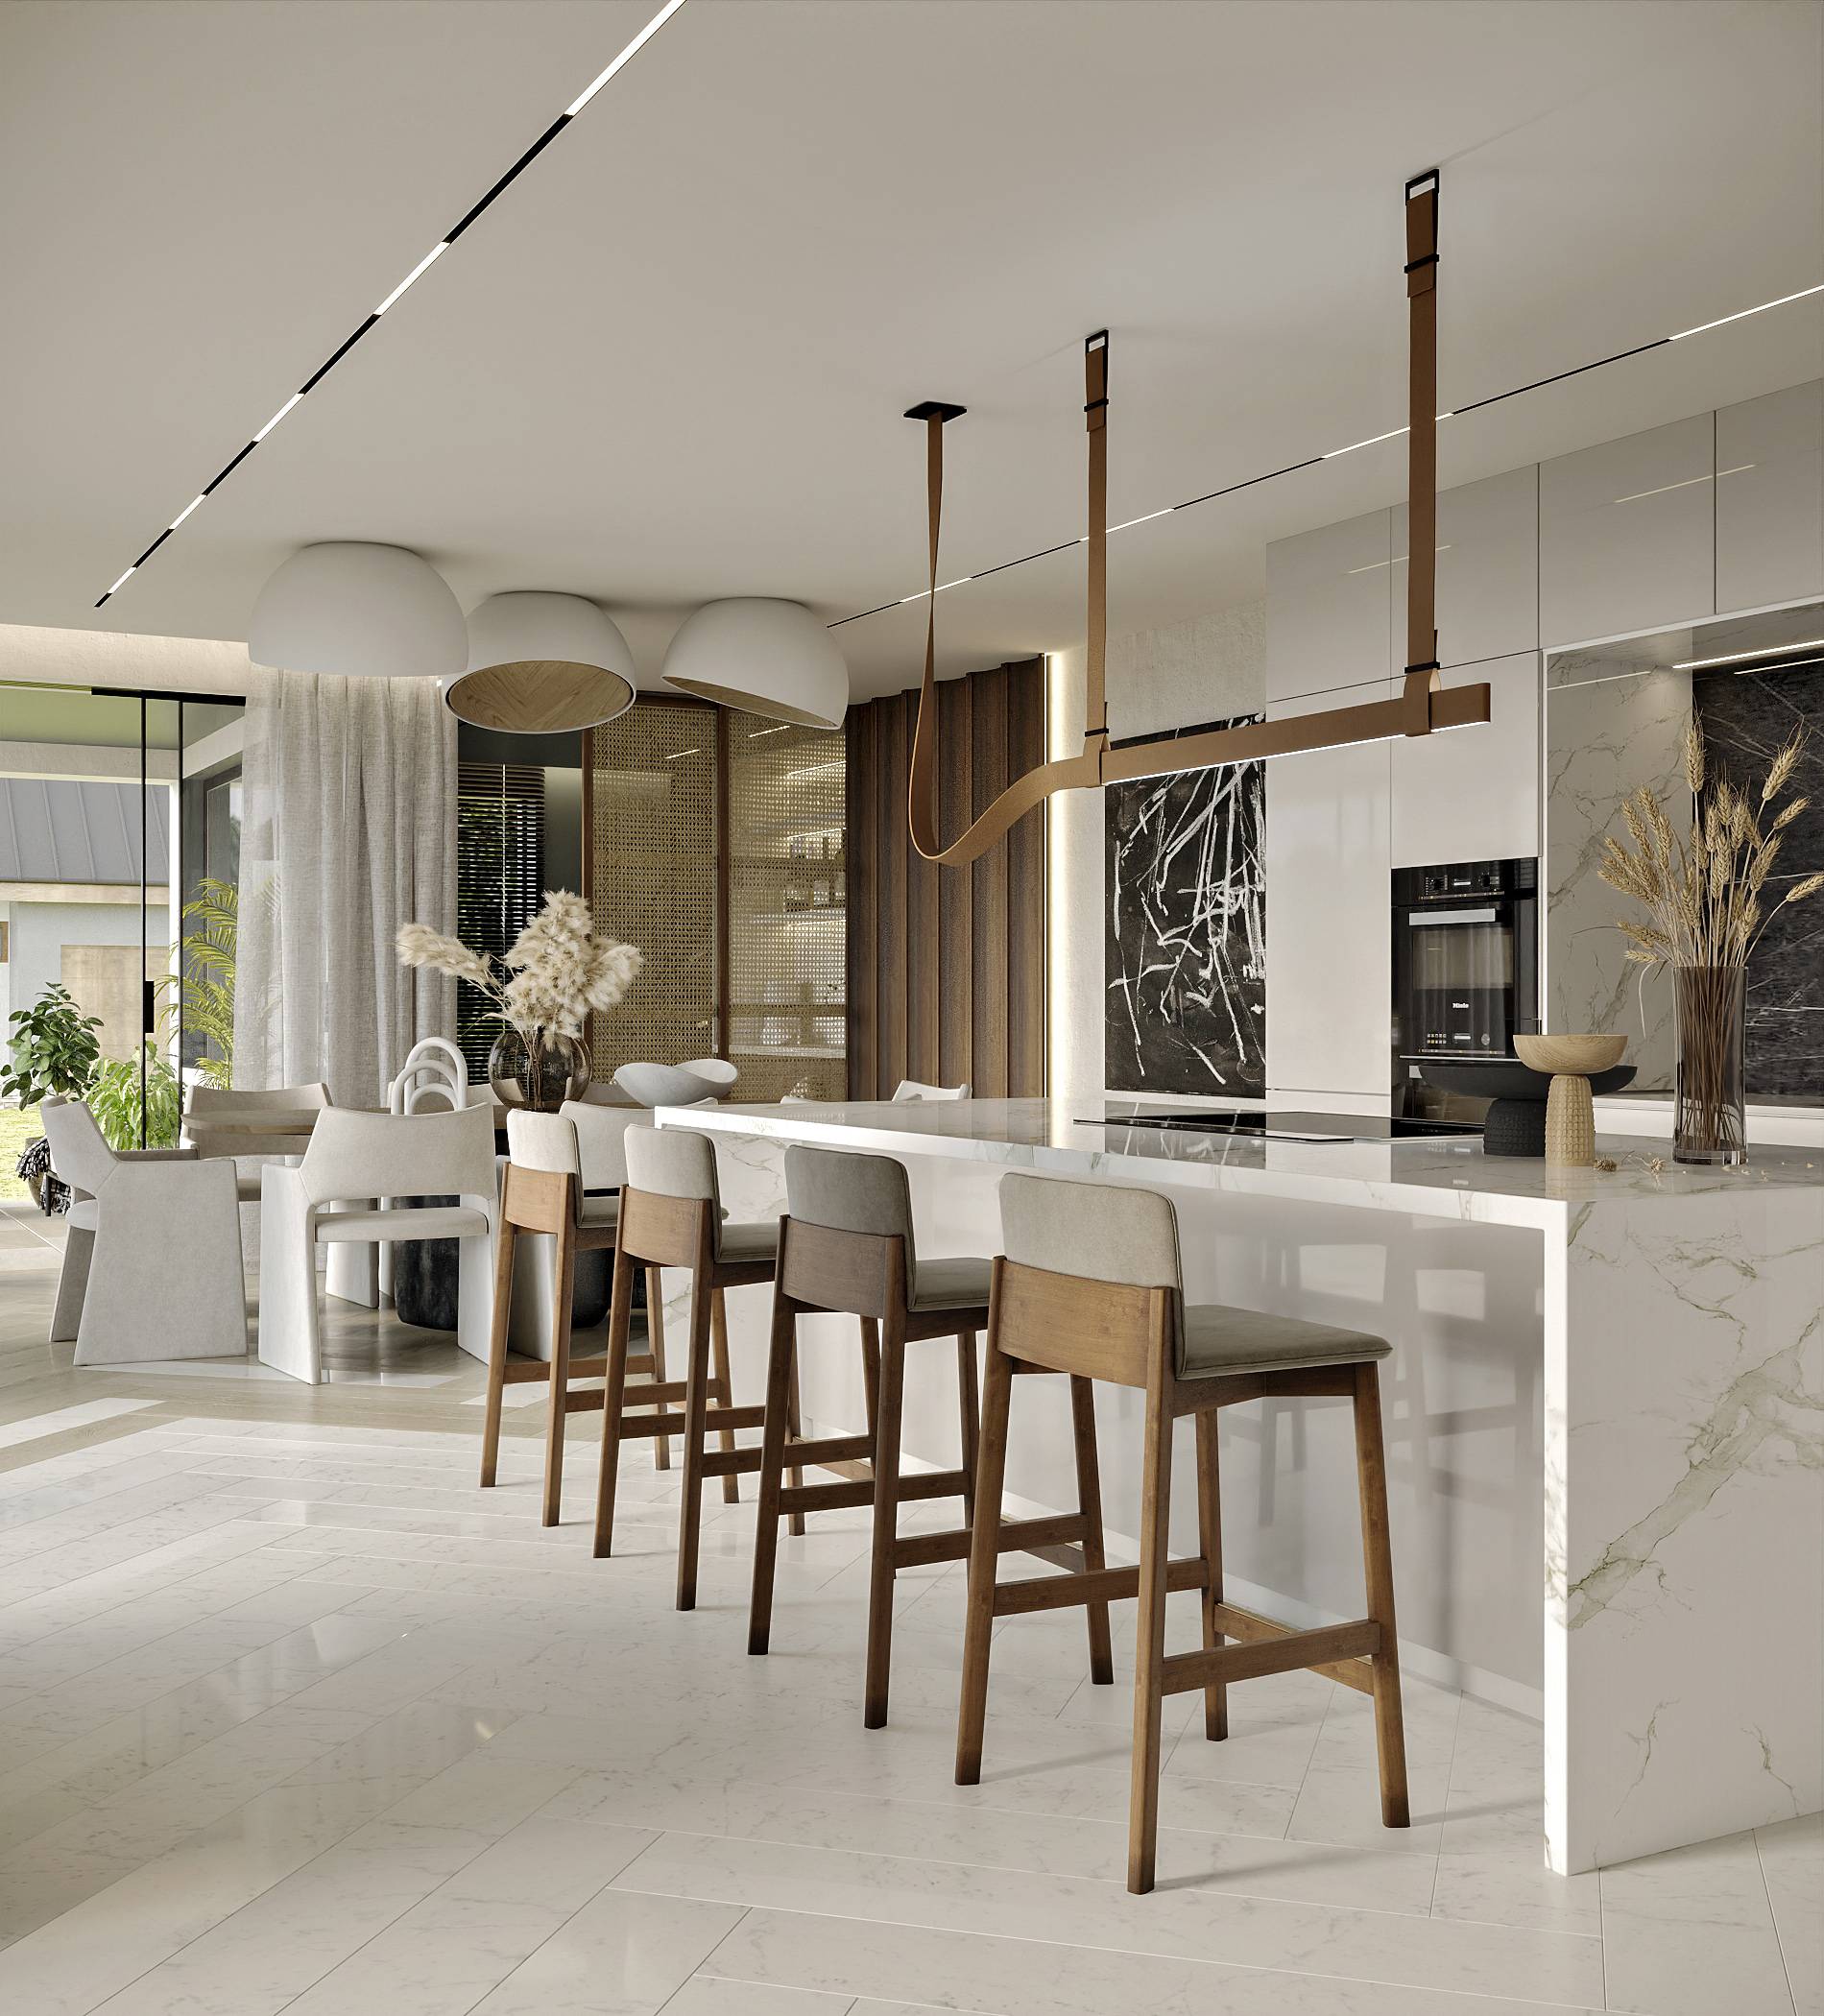 marble kitchen island with wood barstools, minimalist lighting and living room table in background